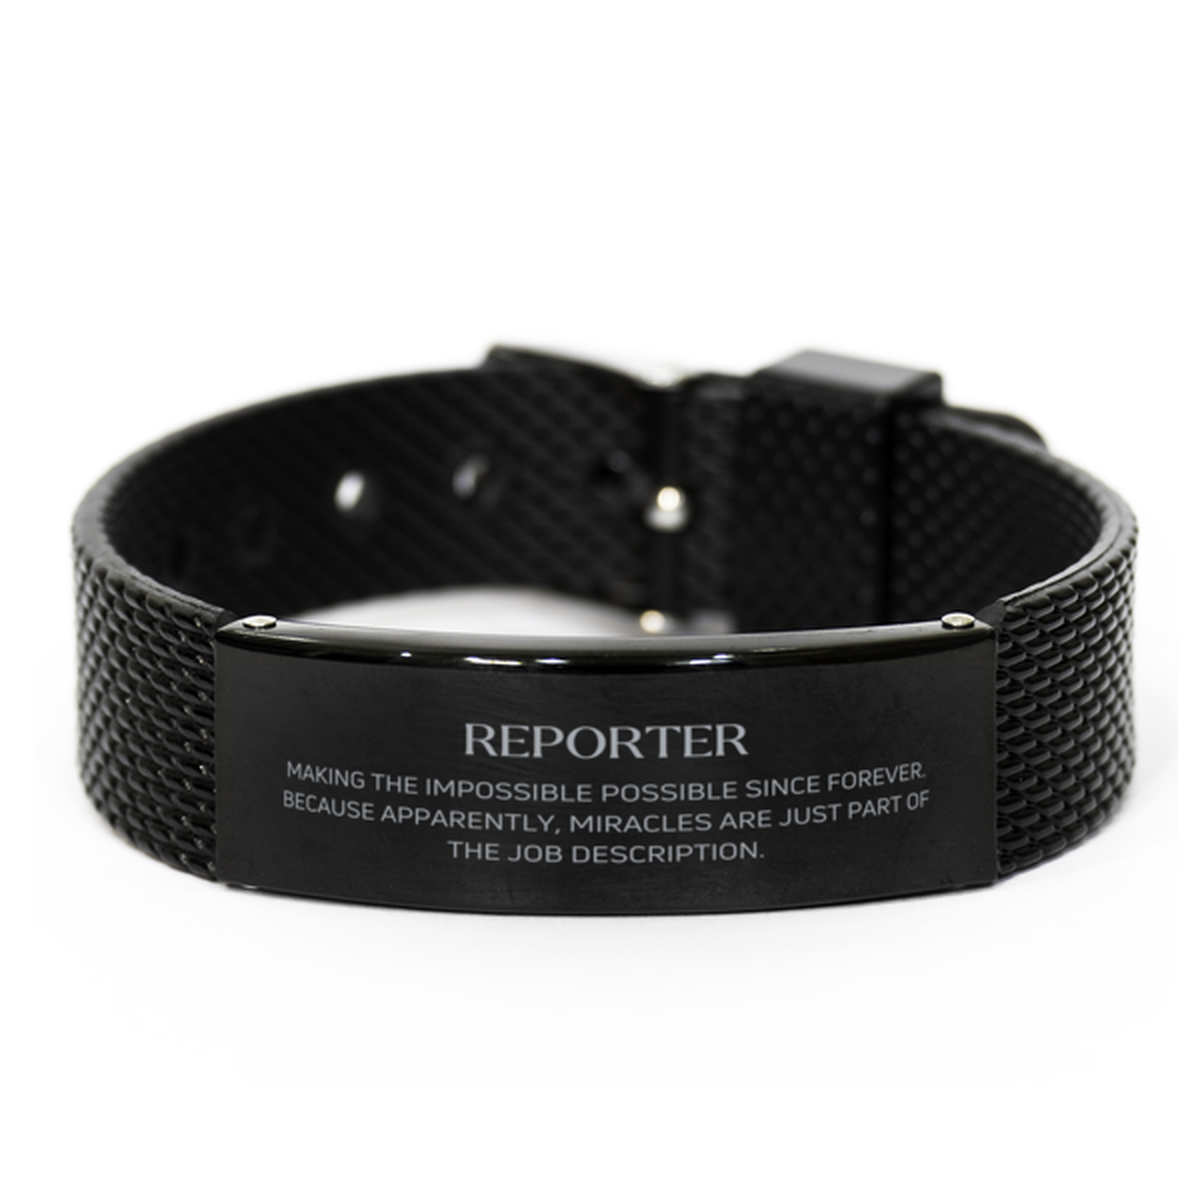 Funny Reporter Gifts, Miracles are just part of the job description, Inspirational Birthday Black Shark Mesh Bracelet For Reporter, Men, Women, Coworkers, Friends, Boss